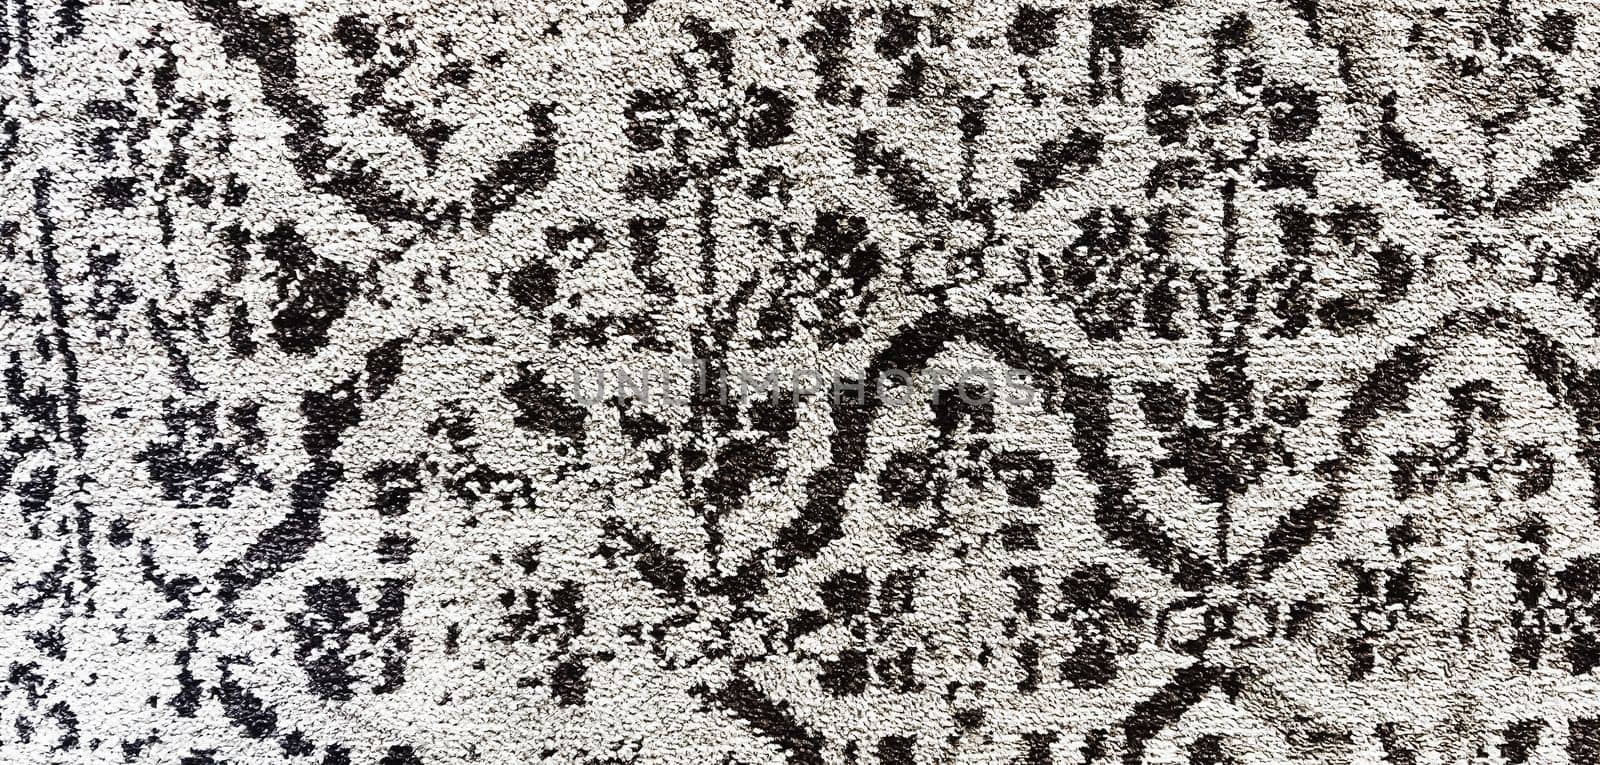 Home decor and interior design, carpet pattern texture and rug background as floor covering, furniture and decoration by Anneleven